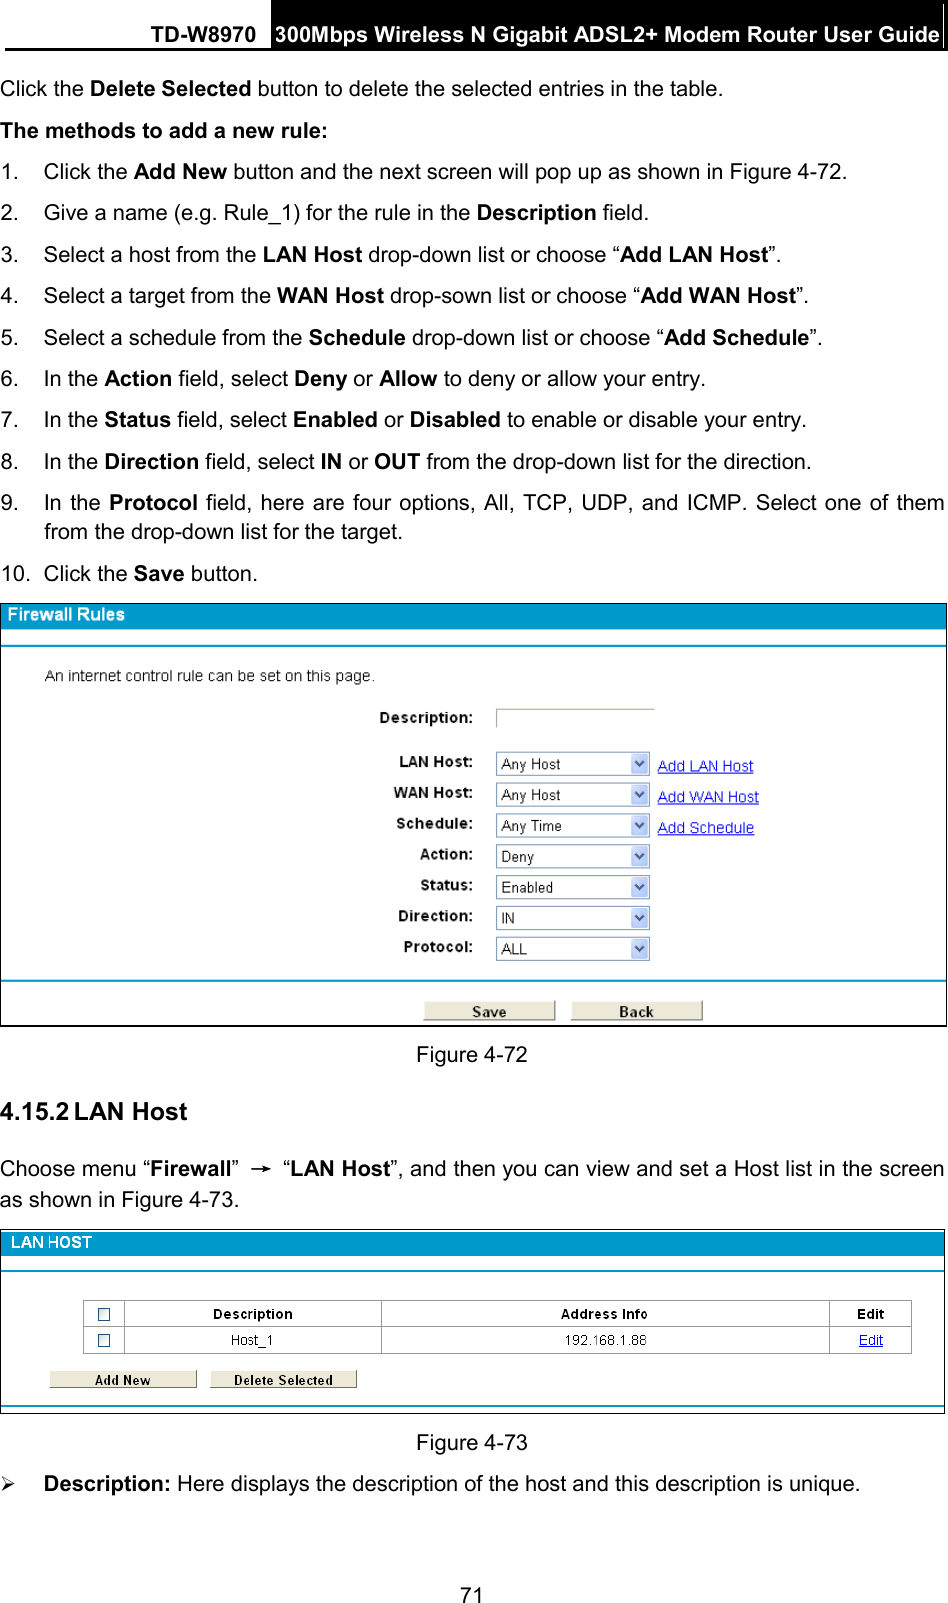 TD-W8970 300Mbps Wireless N Gigabit ADSL2+ Modem Router User Guide  Click the Delete Selected button to delete the selected entries in the table. The methods to add a new rule: 1.  Click the Add New button and the next screen will pop up as shown in Figure 4-72. 2. Give a name (e.g. Rule_1) for the rule in the Description field. 3. Select a host from the LAN Host drop-down list or choose “Add LAN Host”. 4. Select a target from the WAN Host drop-sown list or choose “Add WAN Host”. 5. Select a schedule from the Schedule drop-down list or choose “Add Schedule”. 6. In the Action field, select Deny or Allow to deny or allow your entry. 7. In the Status field, select Enabled or Disabled to enable or disable your entry. 8. In the Direction field, select IN or OUT from the drop-down list for the direction. 9. In the Protocol field, here are four options, All, TCP, UDP, and ICMP. Select one of them from the drop-down list for the target. 10. Click the Save button.  Figure 4-72   4.15.2 LAN Host Choose menu “Firewall” → “LAN Host”, and then you can view and set a Host list in the screen as shown in Figure 4-73.    Figure 4-73  Description: Here displays the description of the host and this description is unique.   71 